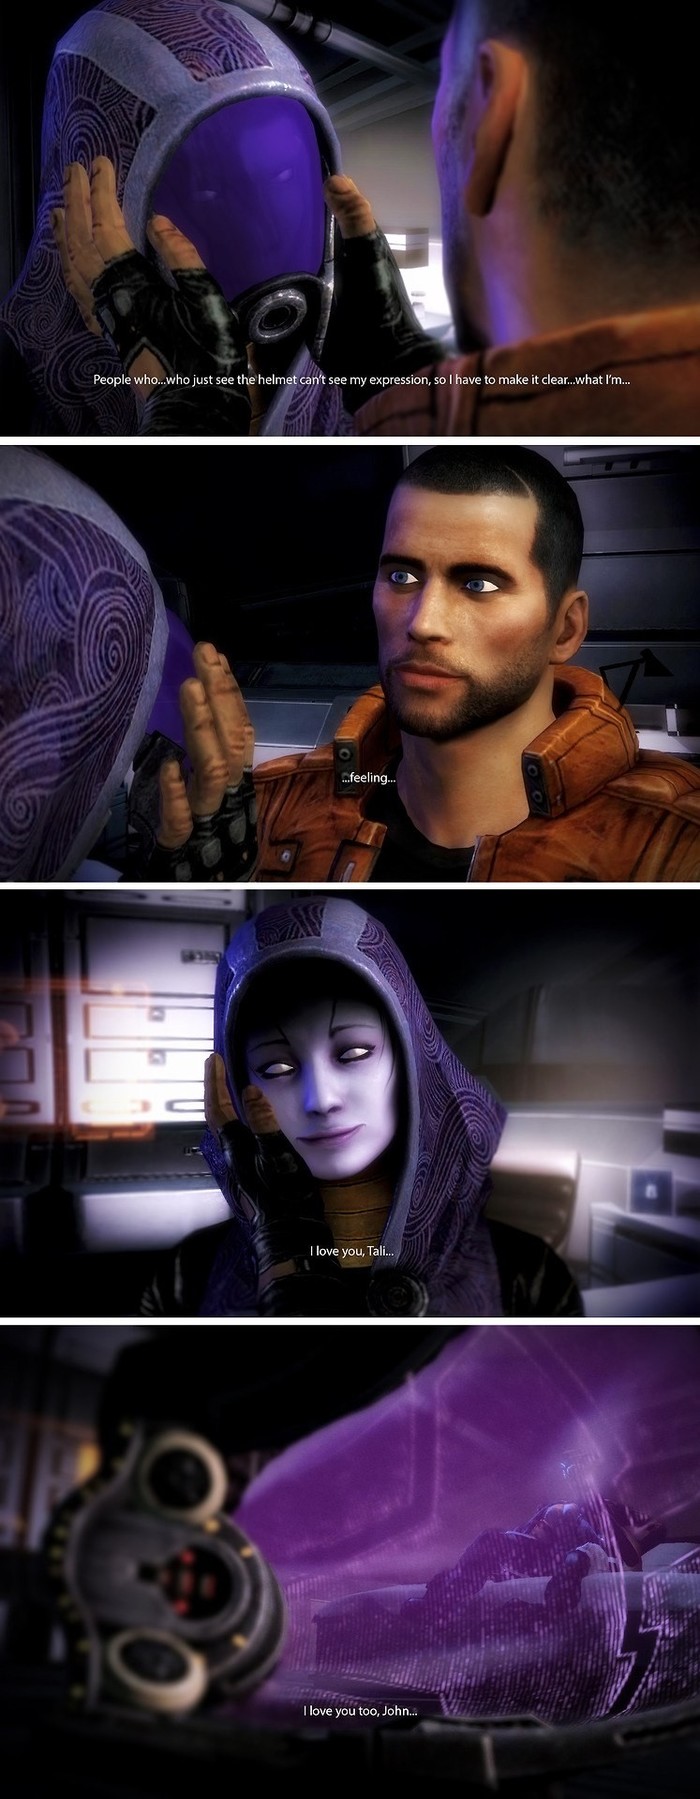 Now between us there are no barriers Shepard! - Tali zorah, Shepard, , Mass effect, Longpost